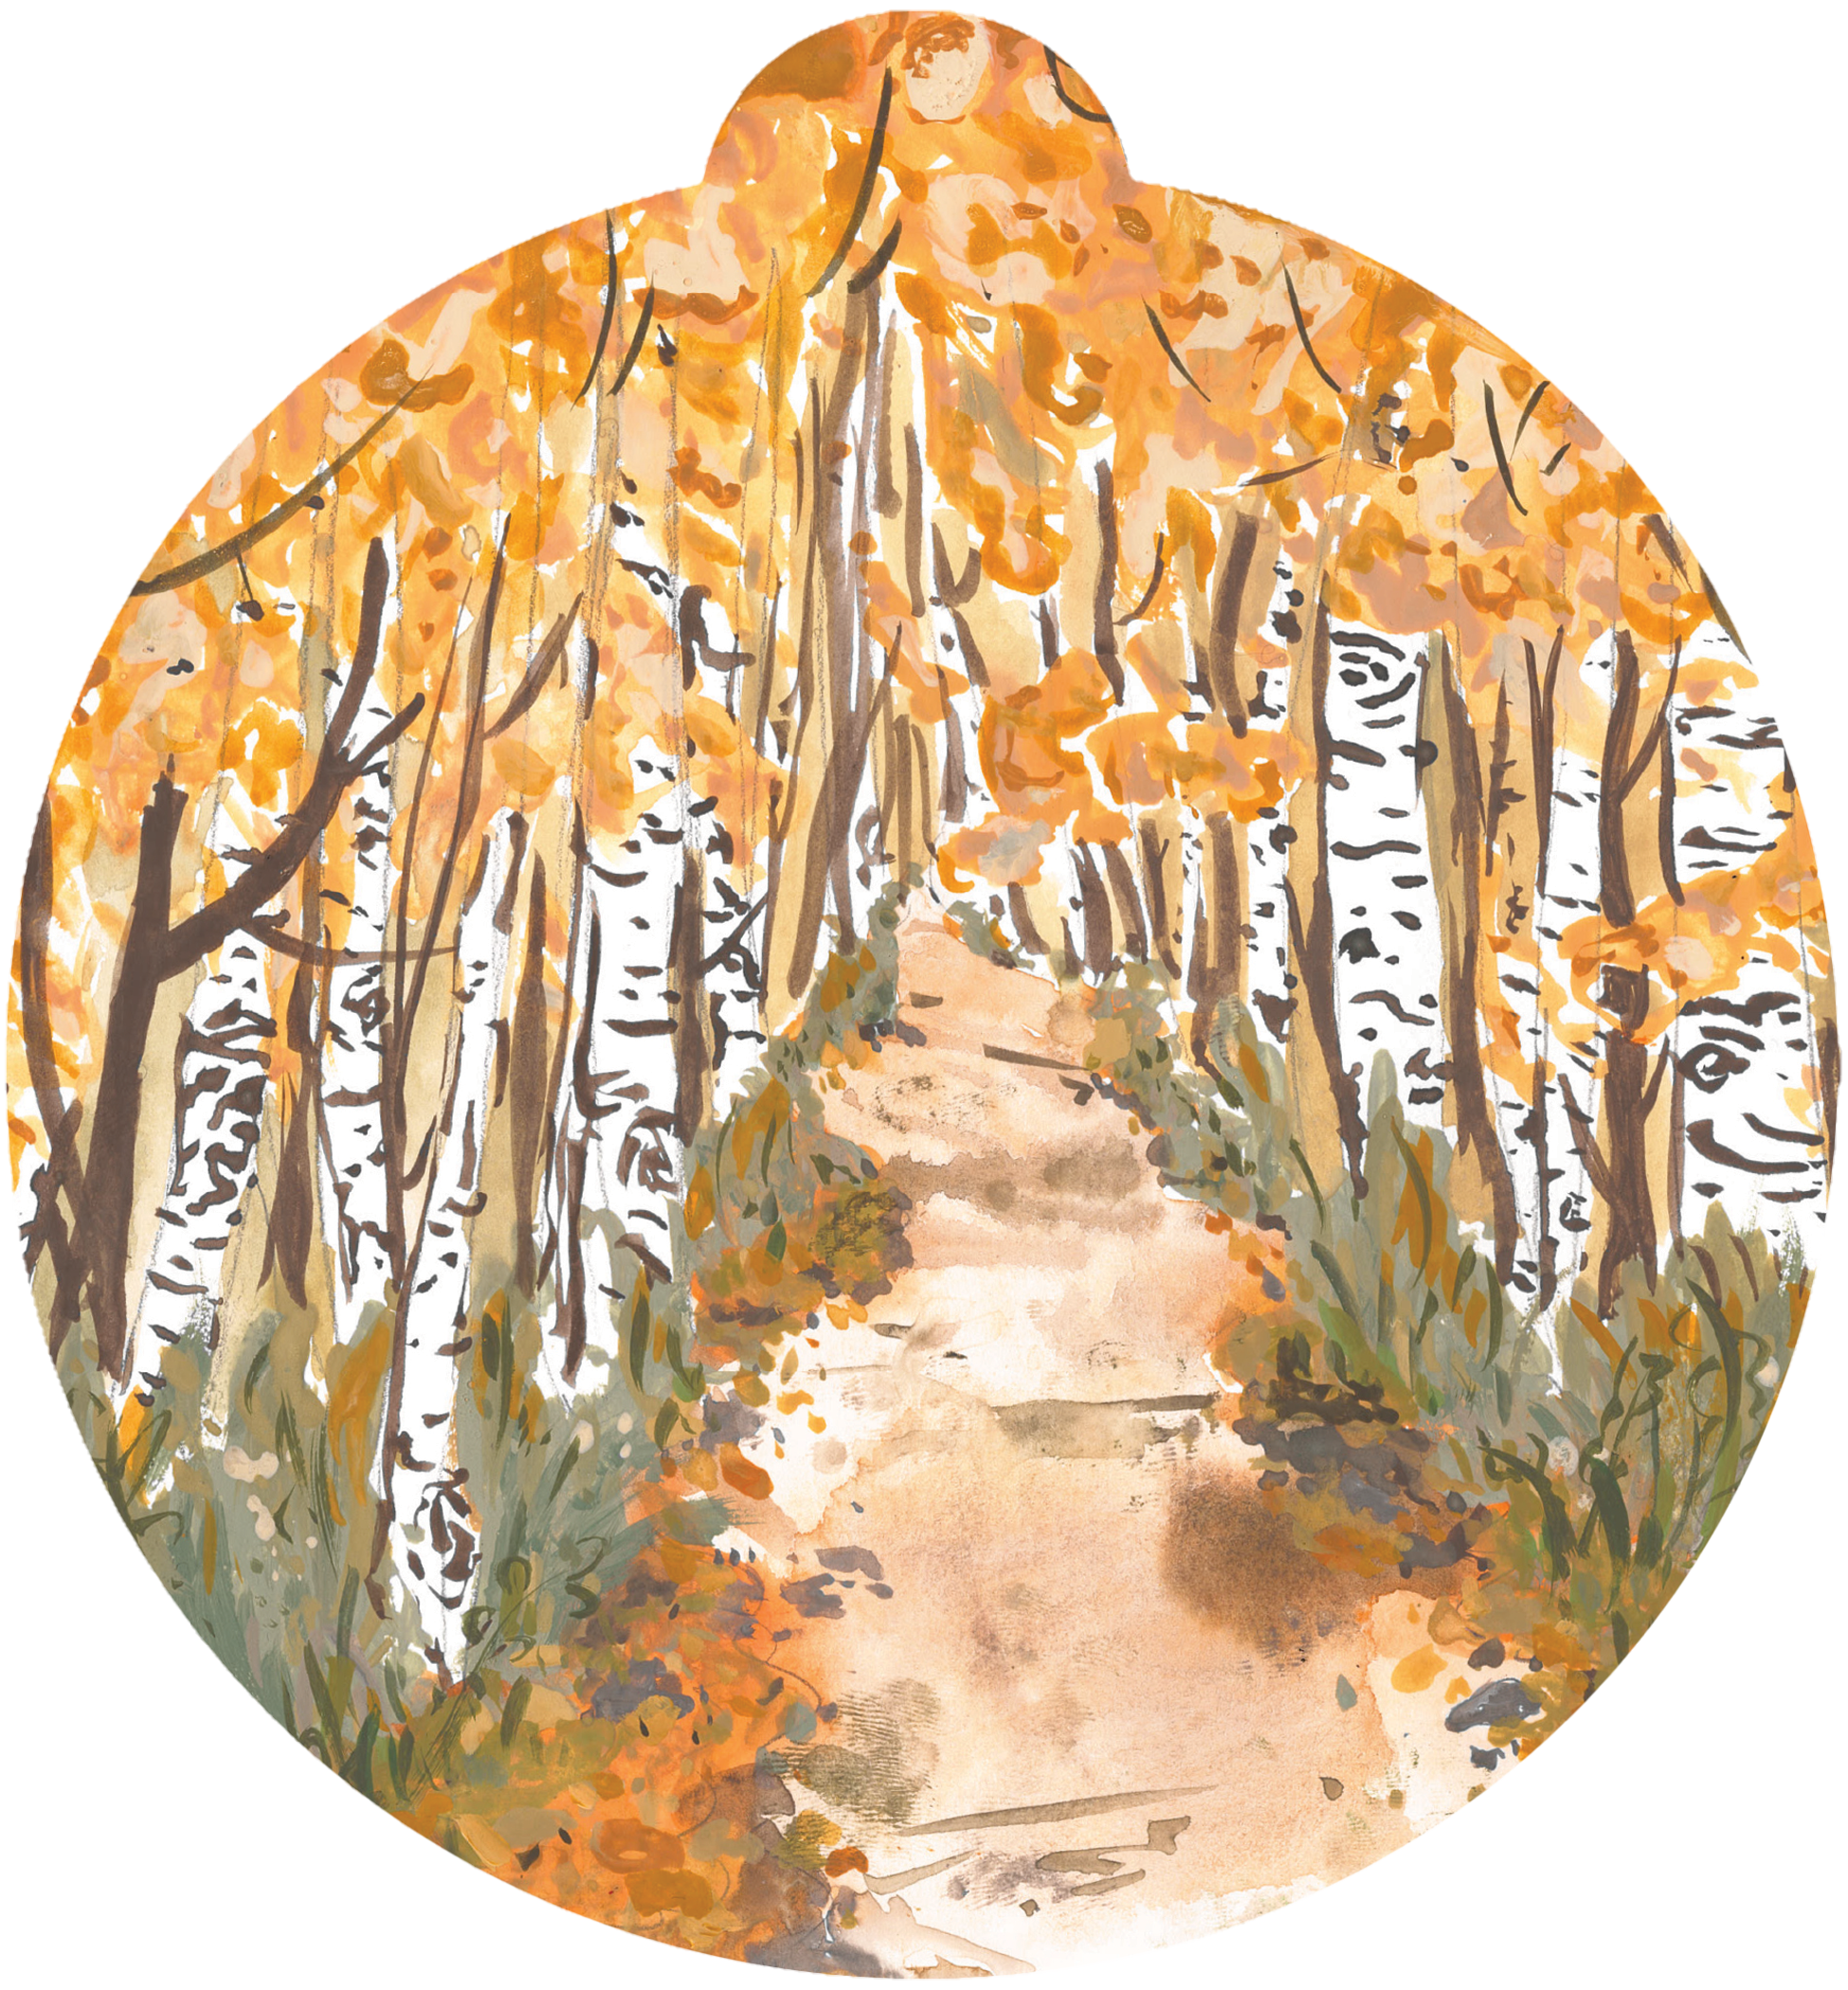 ornament depicting a path leading up through birch trees with orange leaves